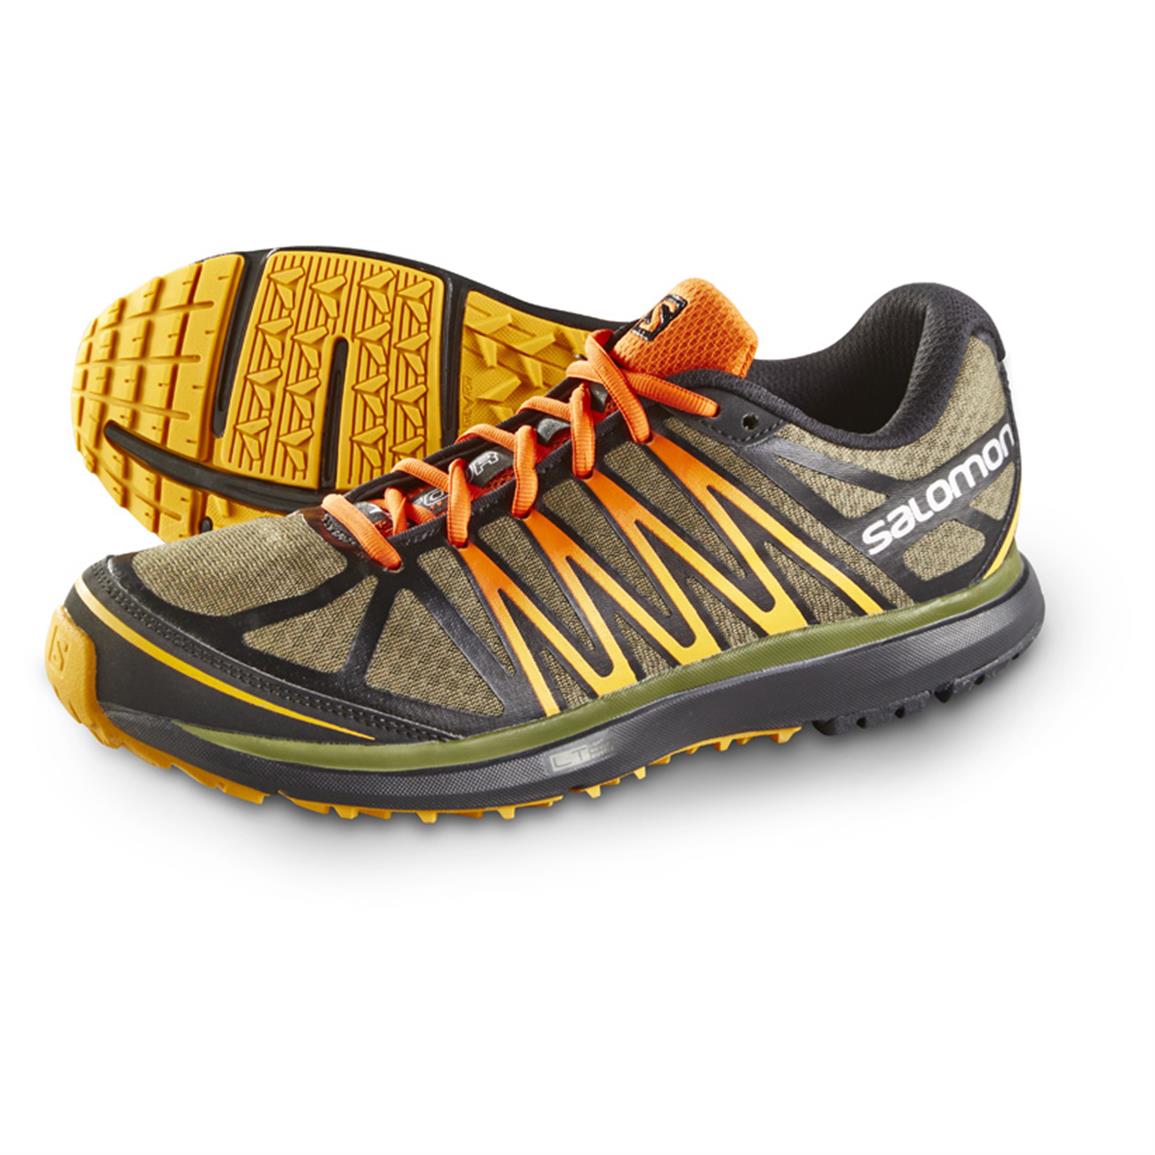 Discuss sulfur Understanding Salomon City Trail X-Tour Running Shoes, Green Black Yellow - 593052,  Running Shoes & Sneakers at Sportsman's Guide